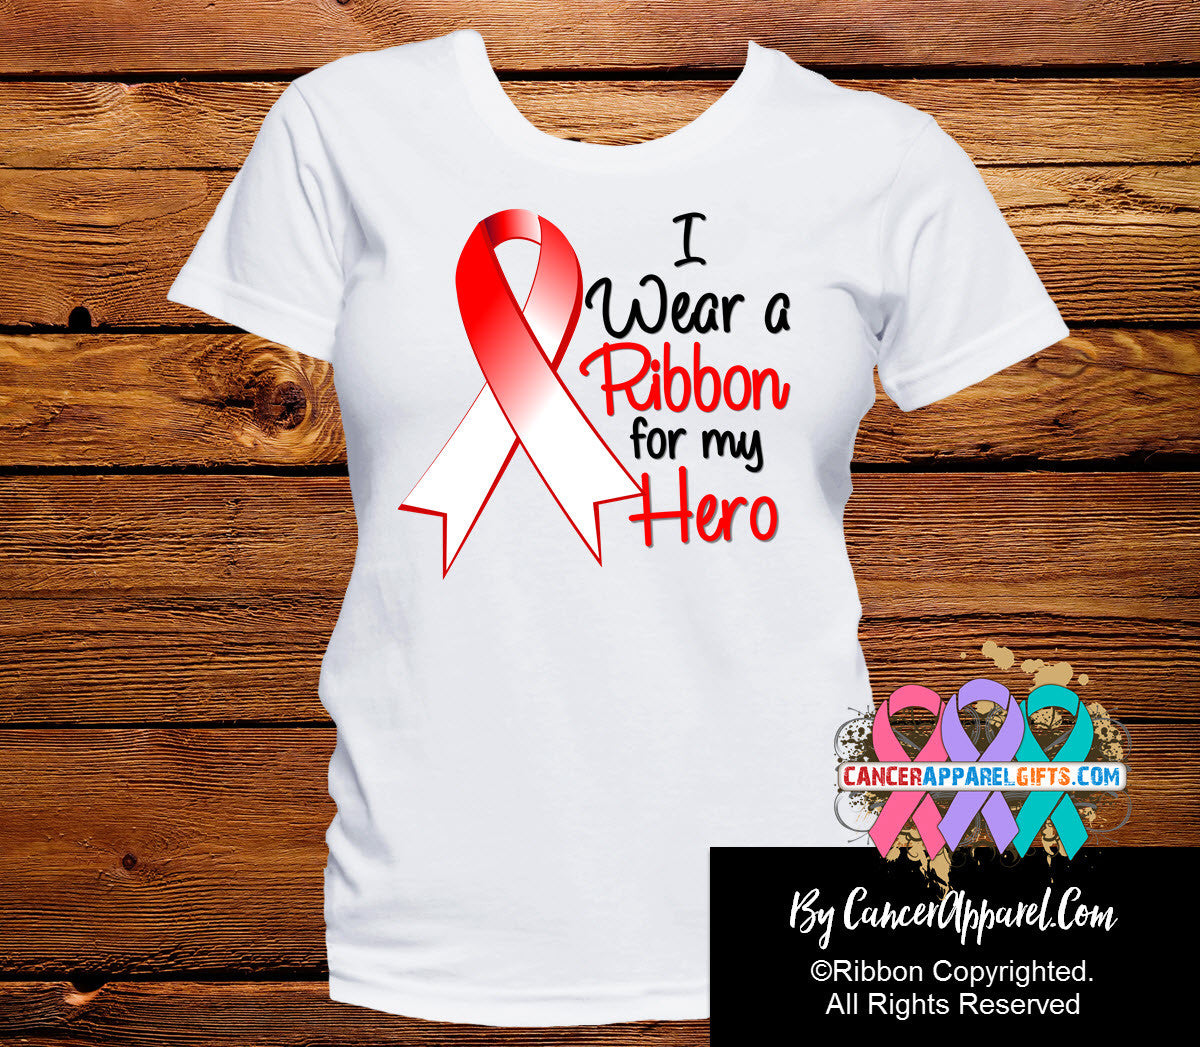 Oral Cancer For My Hero Shirts - Cancer Apparel and Gifts